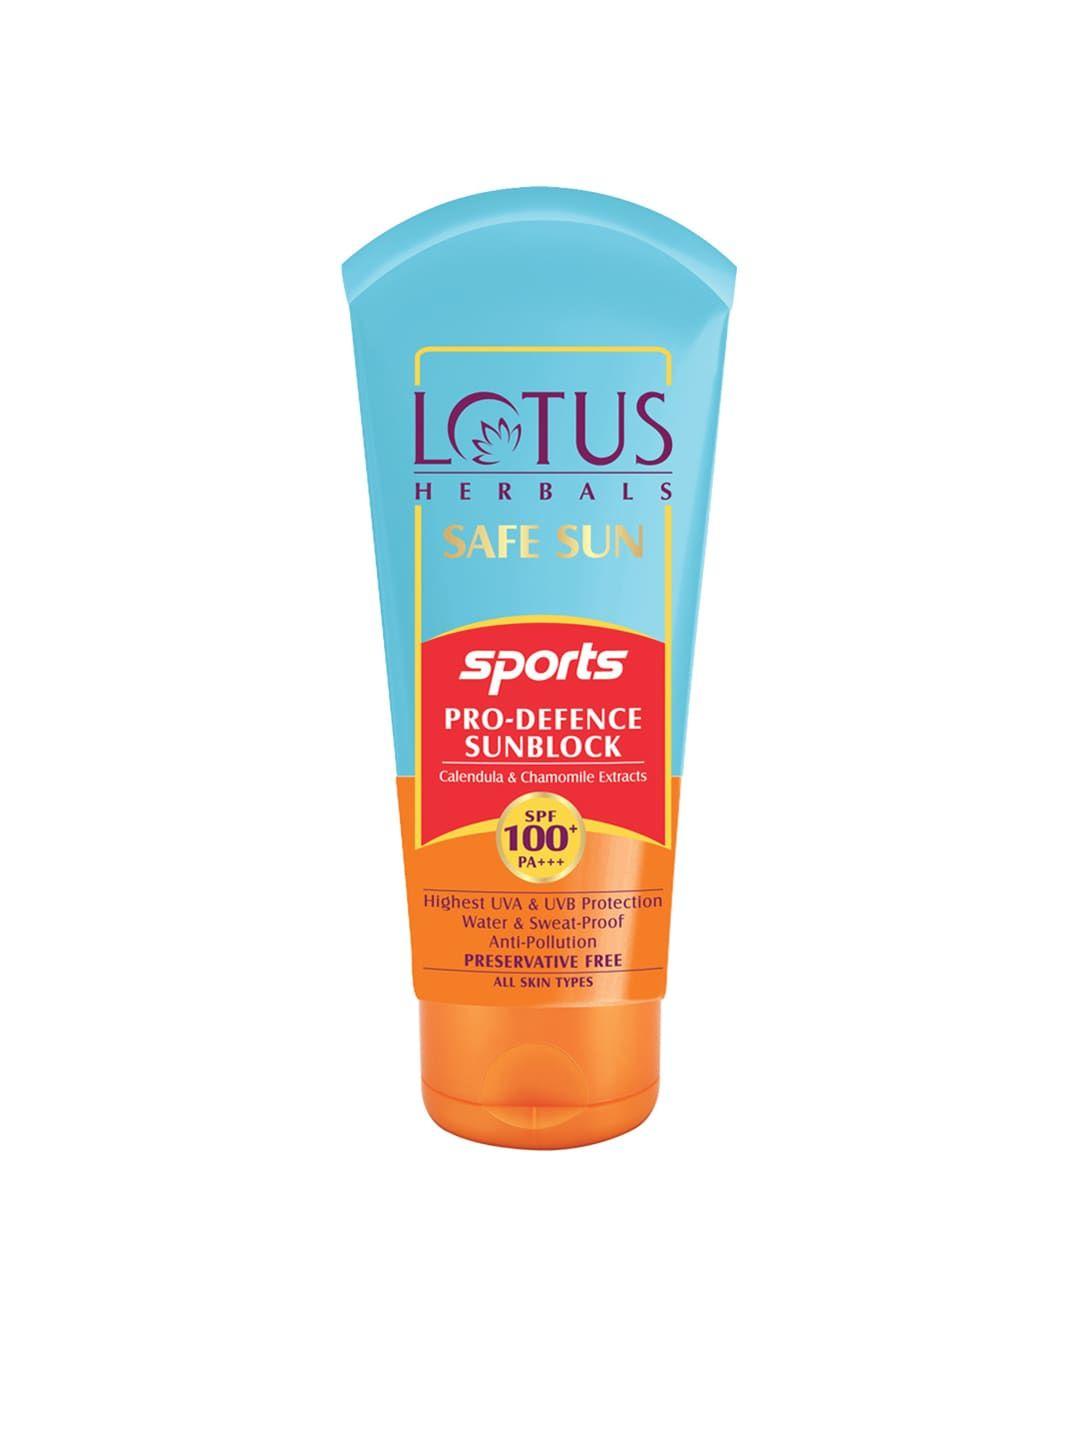 lotus herbals sustainable safe sun sports pro-defence sunblock with 100+ pa+++ 80 g